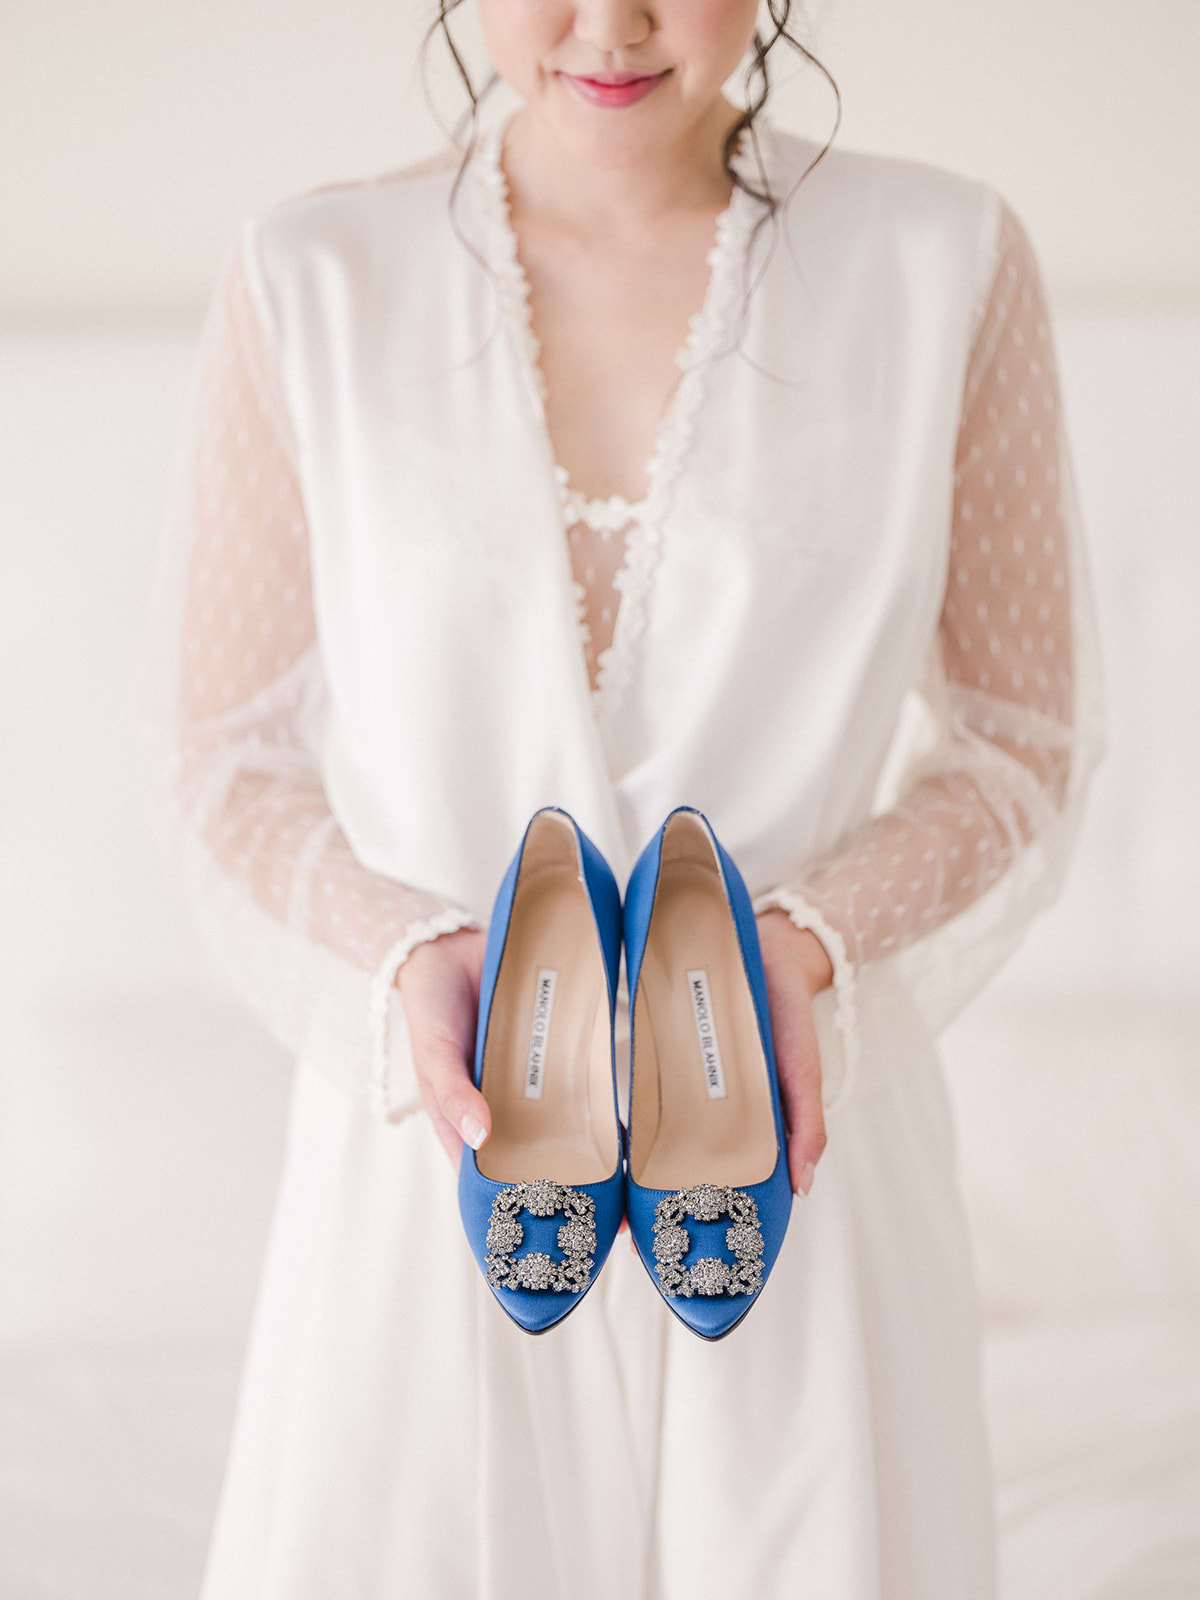 Bride holding out blue shoes